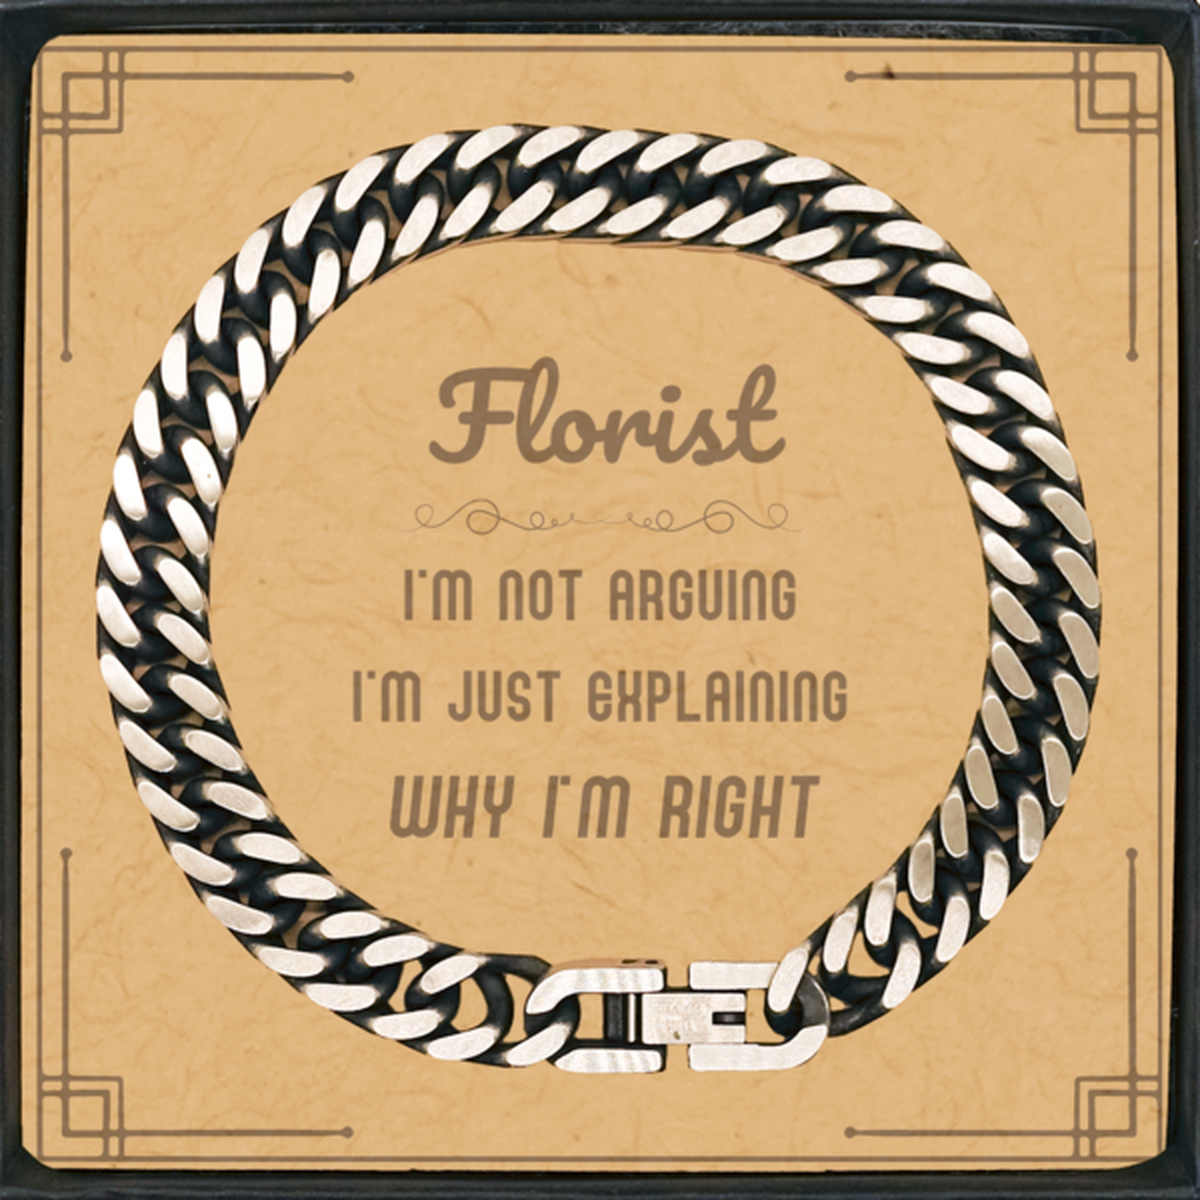 Florist I'm not Arguing. I'm Just Explaining Why I'm RIGHT Cuban Link Chain Bracelet, Funny Saying Quote Florist Gifts For Florist Message Card Graduation Birthday Christmas Gifts for Men Women Coworker